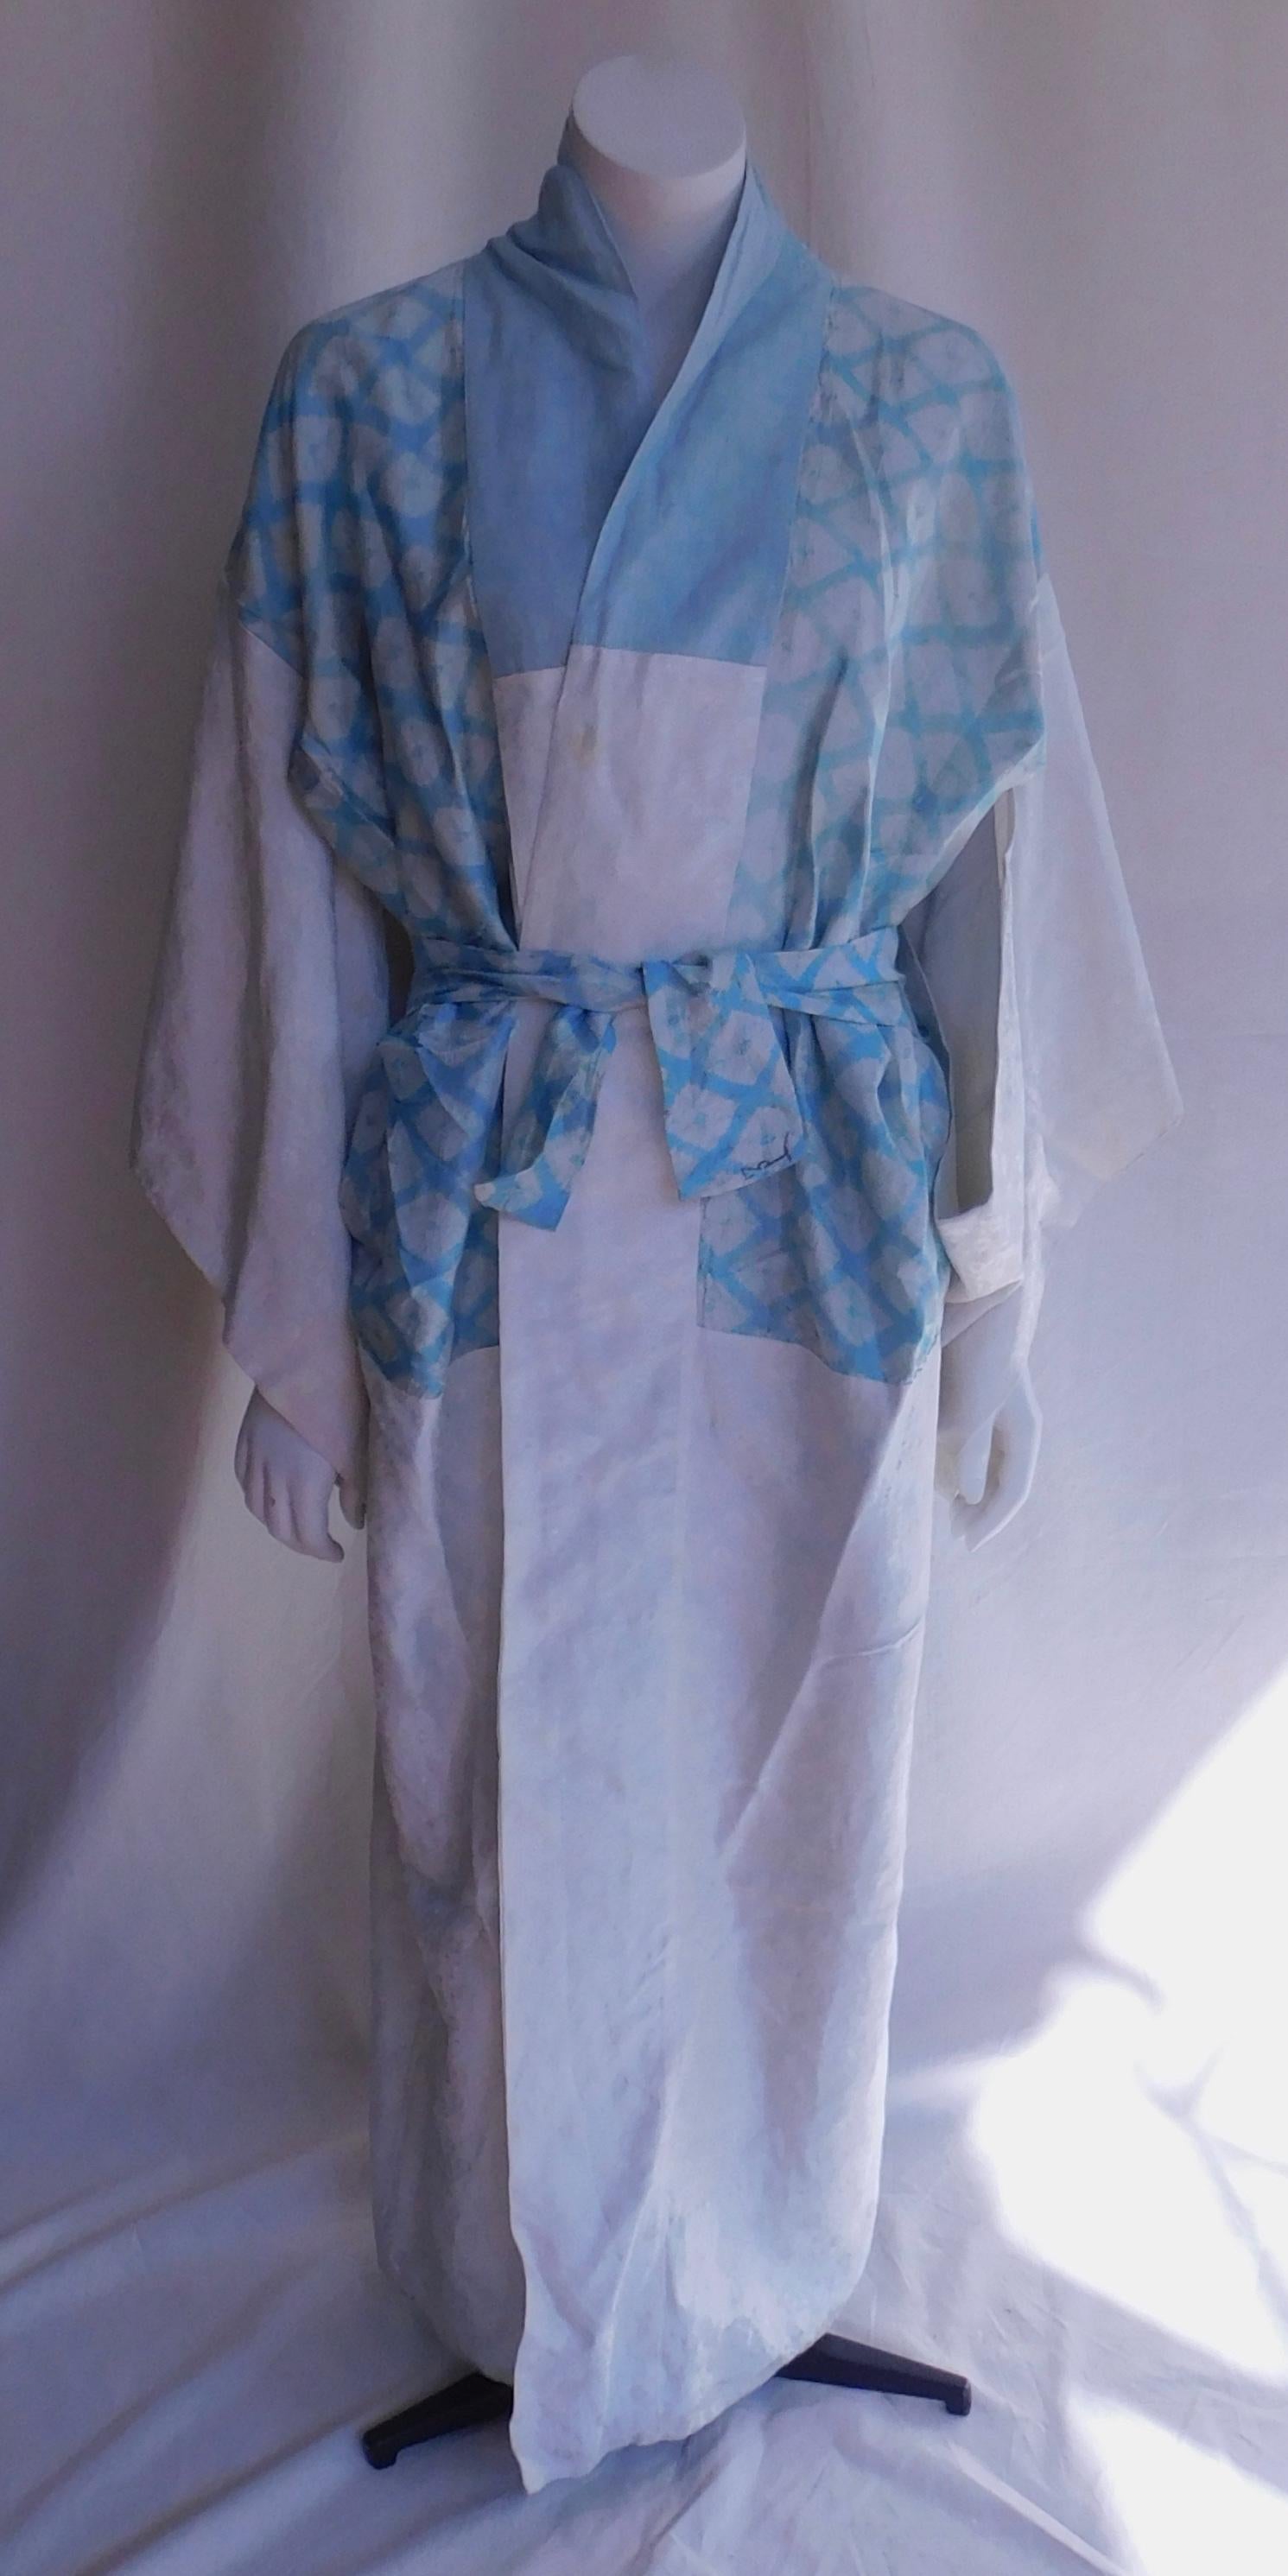 Taisho period Japanese Juban under kimono handmade and dyed using the shibori resist tying technique. The exterior is silk and the lining is handwoven cotton dyed a soft ice blue.